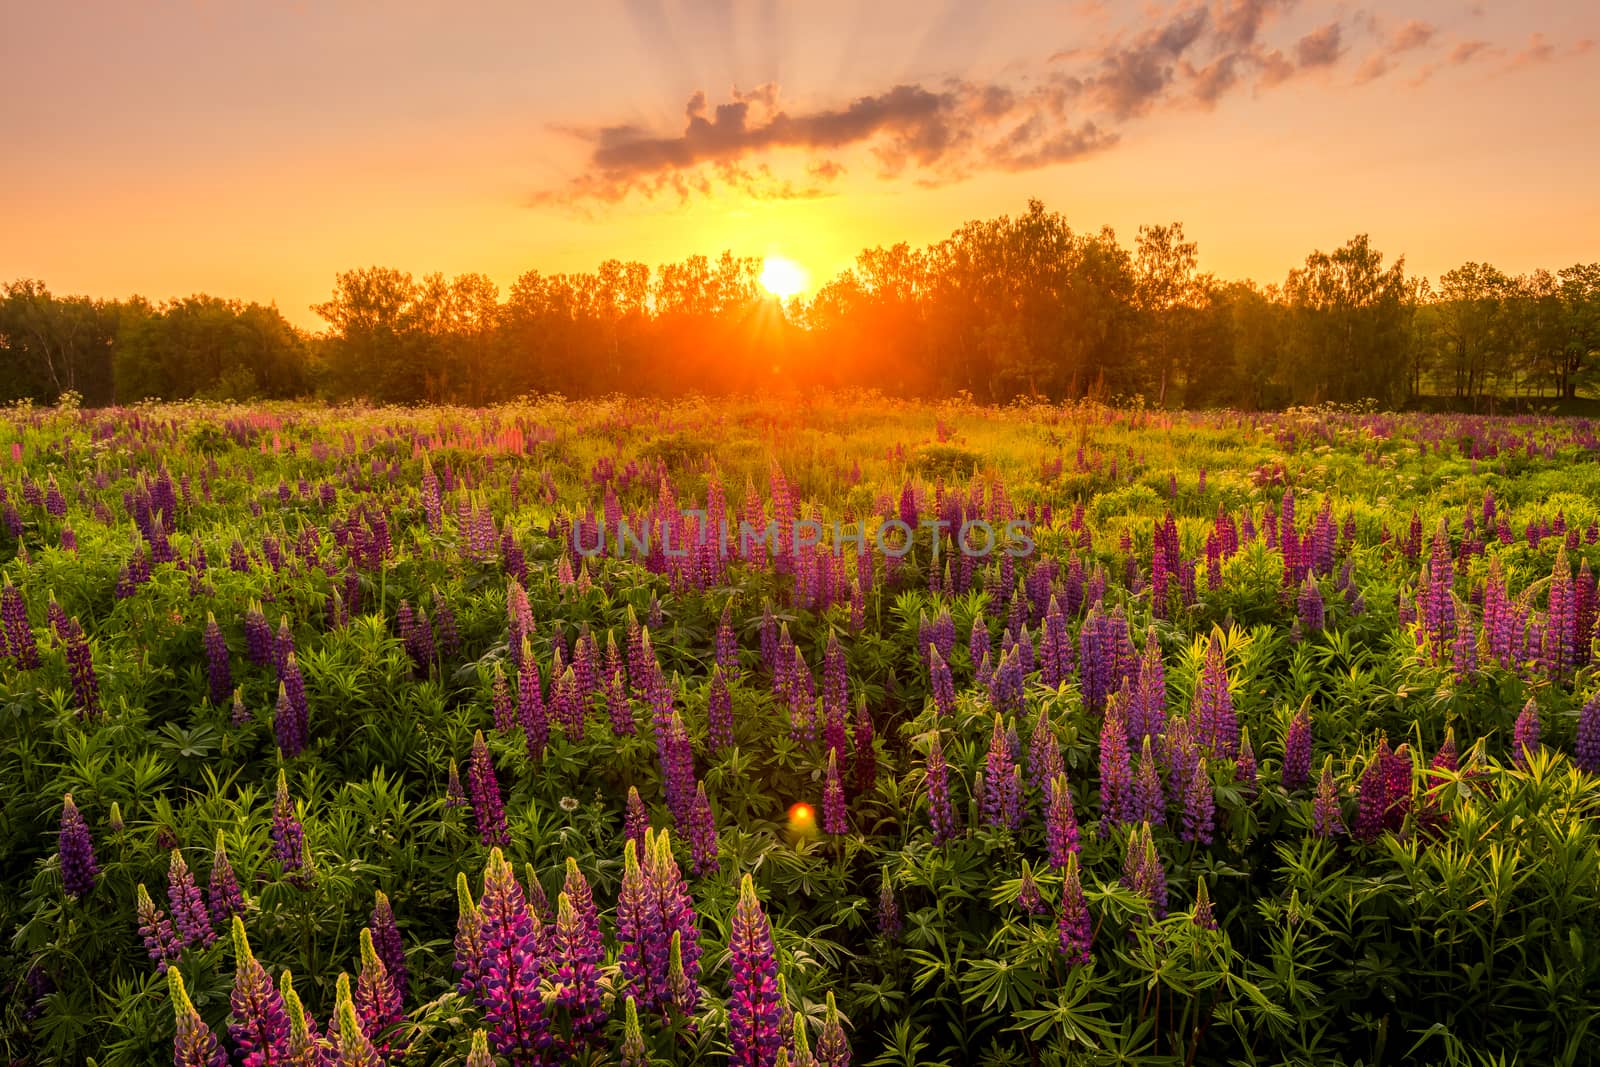 Sunrise on a field covered with flowering lupines in spring or early summer season with fog and trees on a background in morning. Landscape.